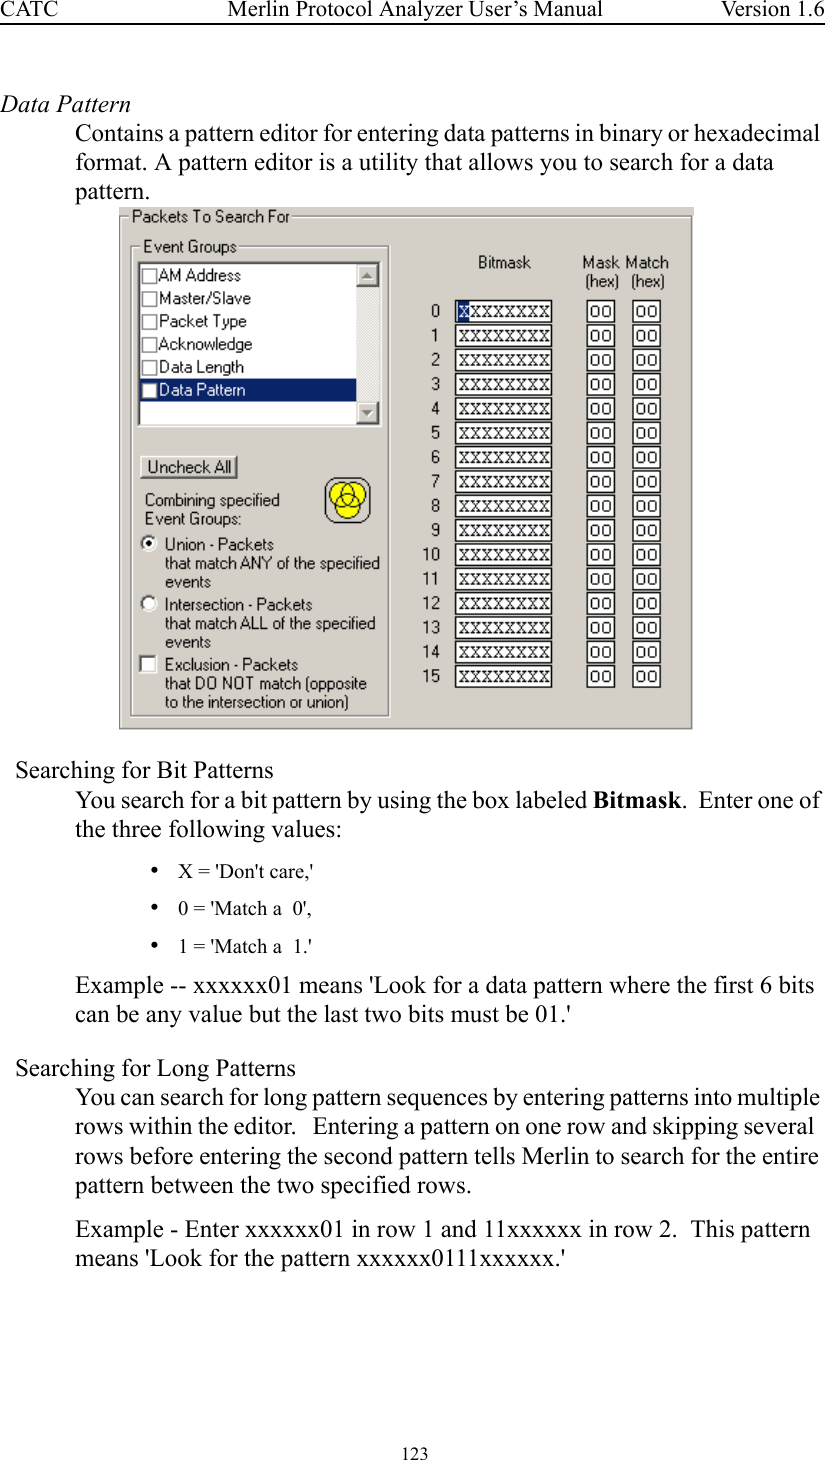  123 Merlin Protocol Analyzer User’s ManualCATC Version 1.6Data PatternContains a pattern editor for entering data patterns in binary or hexadecimal format. A pattern editor is a utility that allows you to search for a data pattern.  Searching for Bit PatternsYou search for a bit pattern by using the box labeled Bitmask.  Enter one of the three following values:•X = &apos;Don&apos;t care,&apos; •0 = &apos;Match a  0&apos;,  •1 = &apos;Match a  1.&apos;  Example -- xxxxxx01 means &apos;Look for a data pattern where the first 6 bits can be any value but the last two bits must be 01.&apos;Searching for Long PatternsYou can search for long pattern sequences by entering patterns into multiple rows within the editor.   Entering a pattern on one row and skipping several  rows before entering the second pattern tells Merlin to search for the entire pattern between the two specified rows.  Example - Enter xxxxxx01 in row 1 and 11xxxxxx in row 2.  This pattern means &apos;Look for the pattern xxxxxx0111xxxxxx.&apos;  